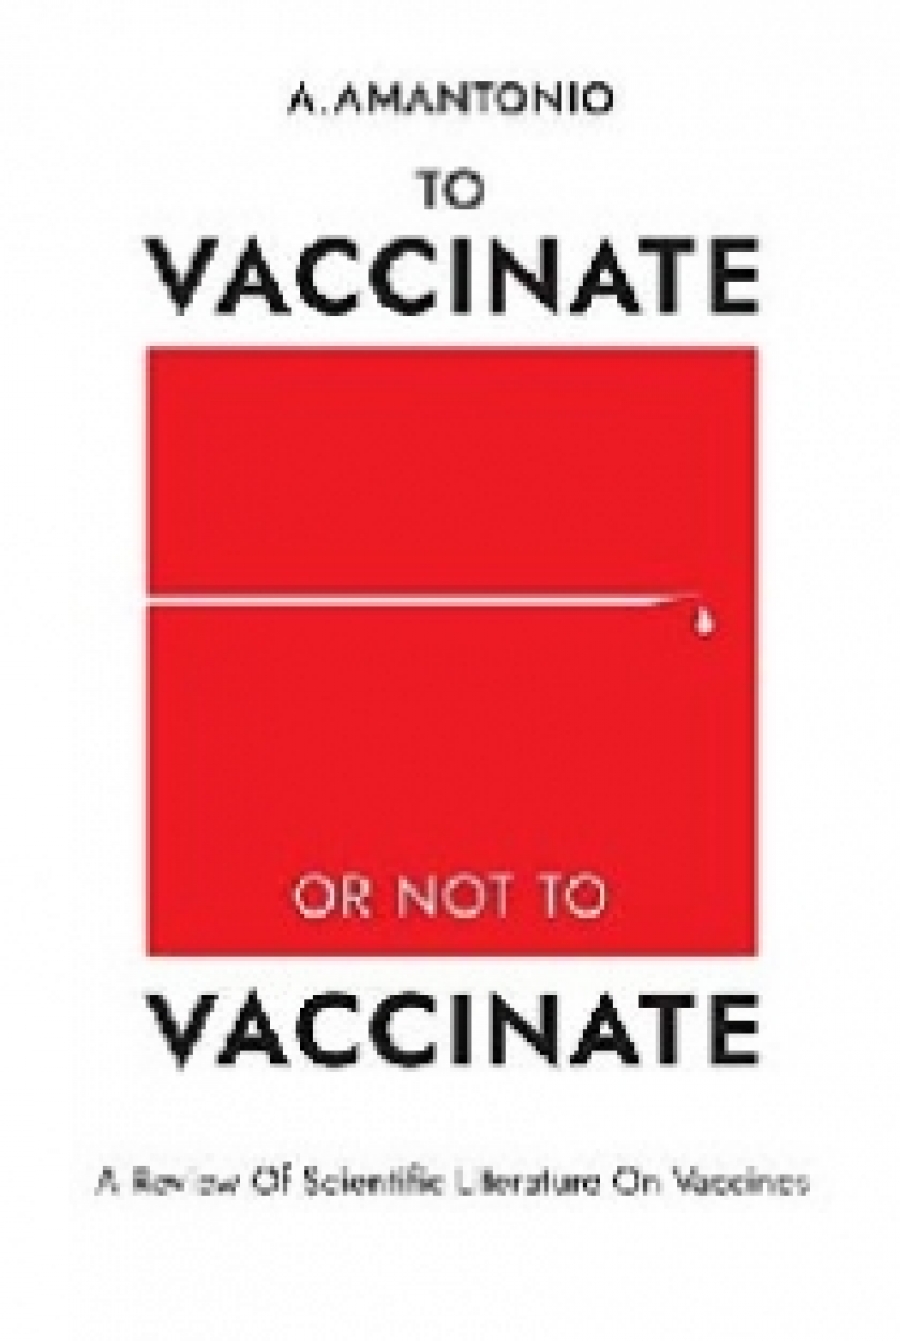 Amantonio To Vaccinate or not to Vaccinate: A Review of Scientific Literature on Vaccines 